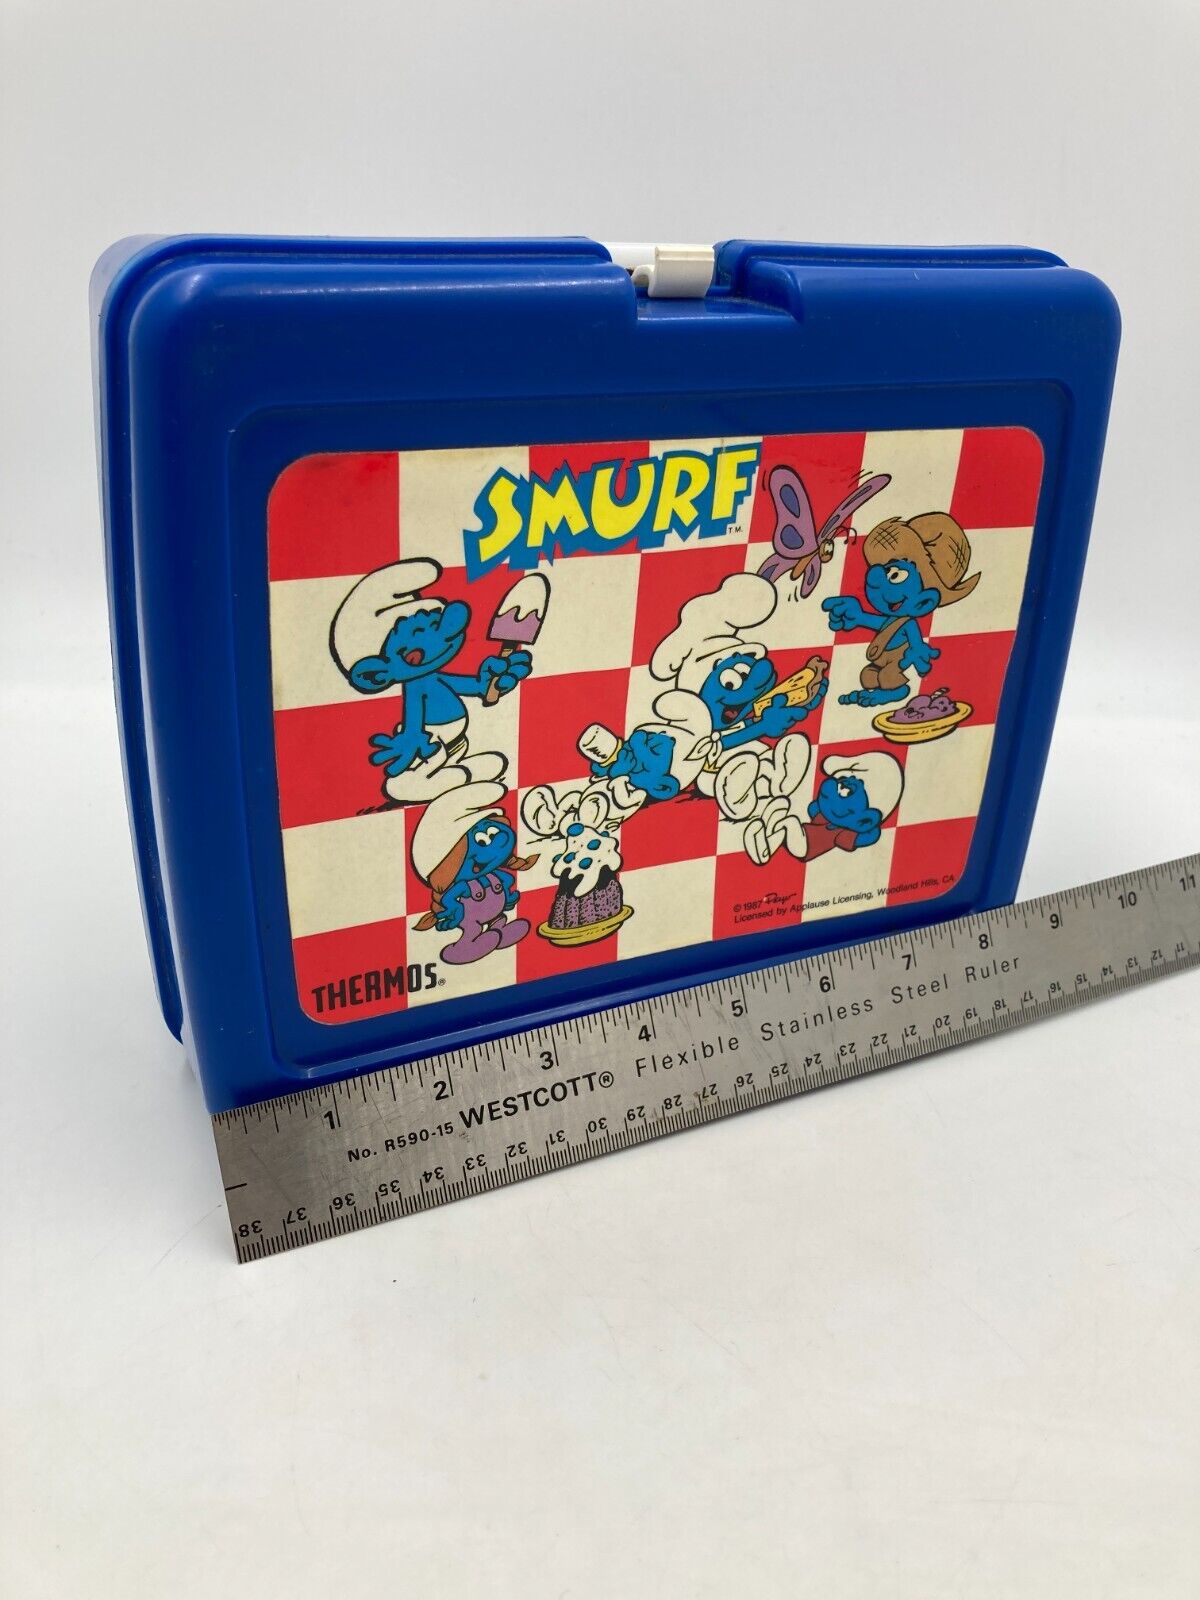 Vintage 1987 Smurf Cartoon Characters Applause Thermos Lunchbox Retro Version